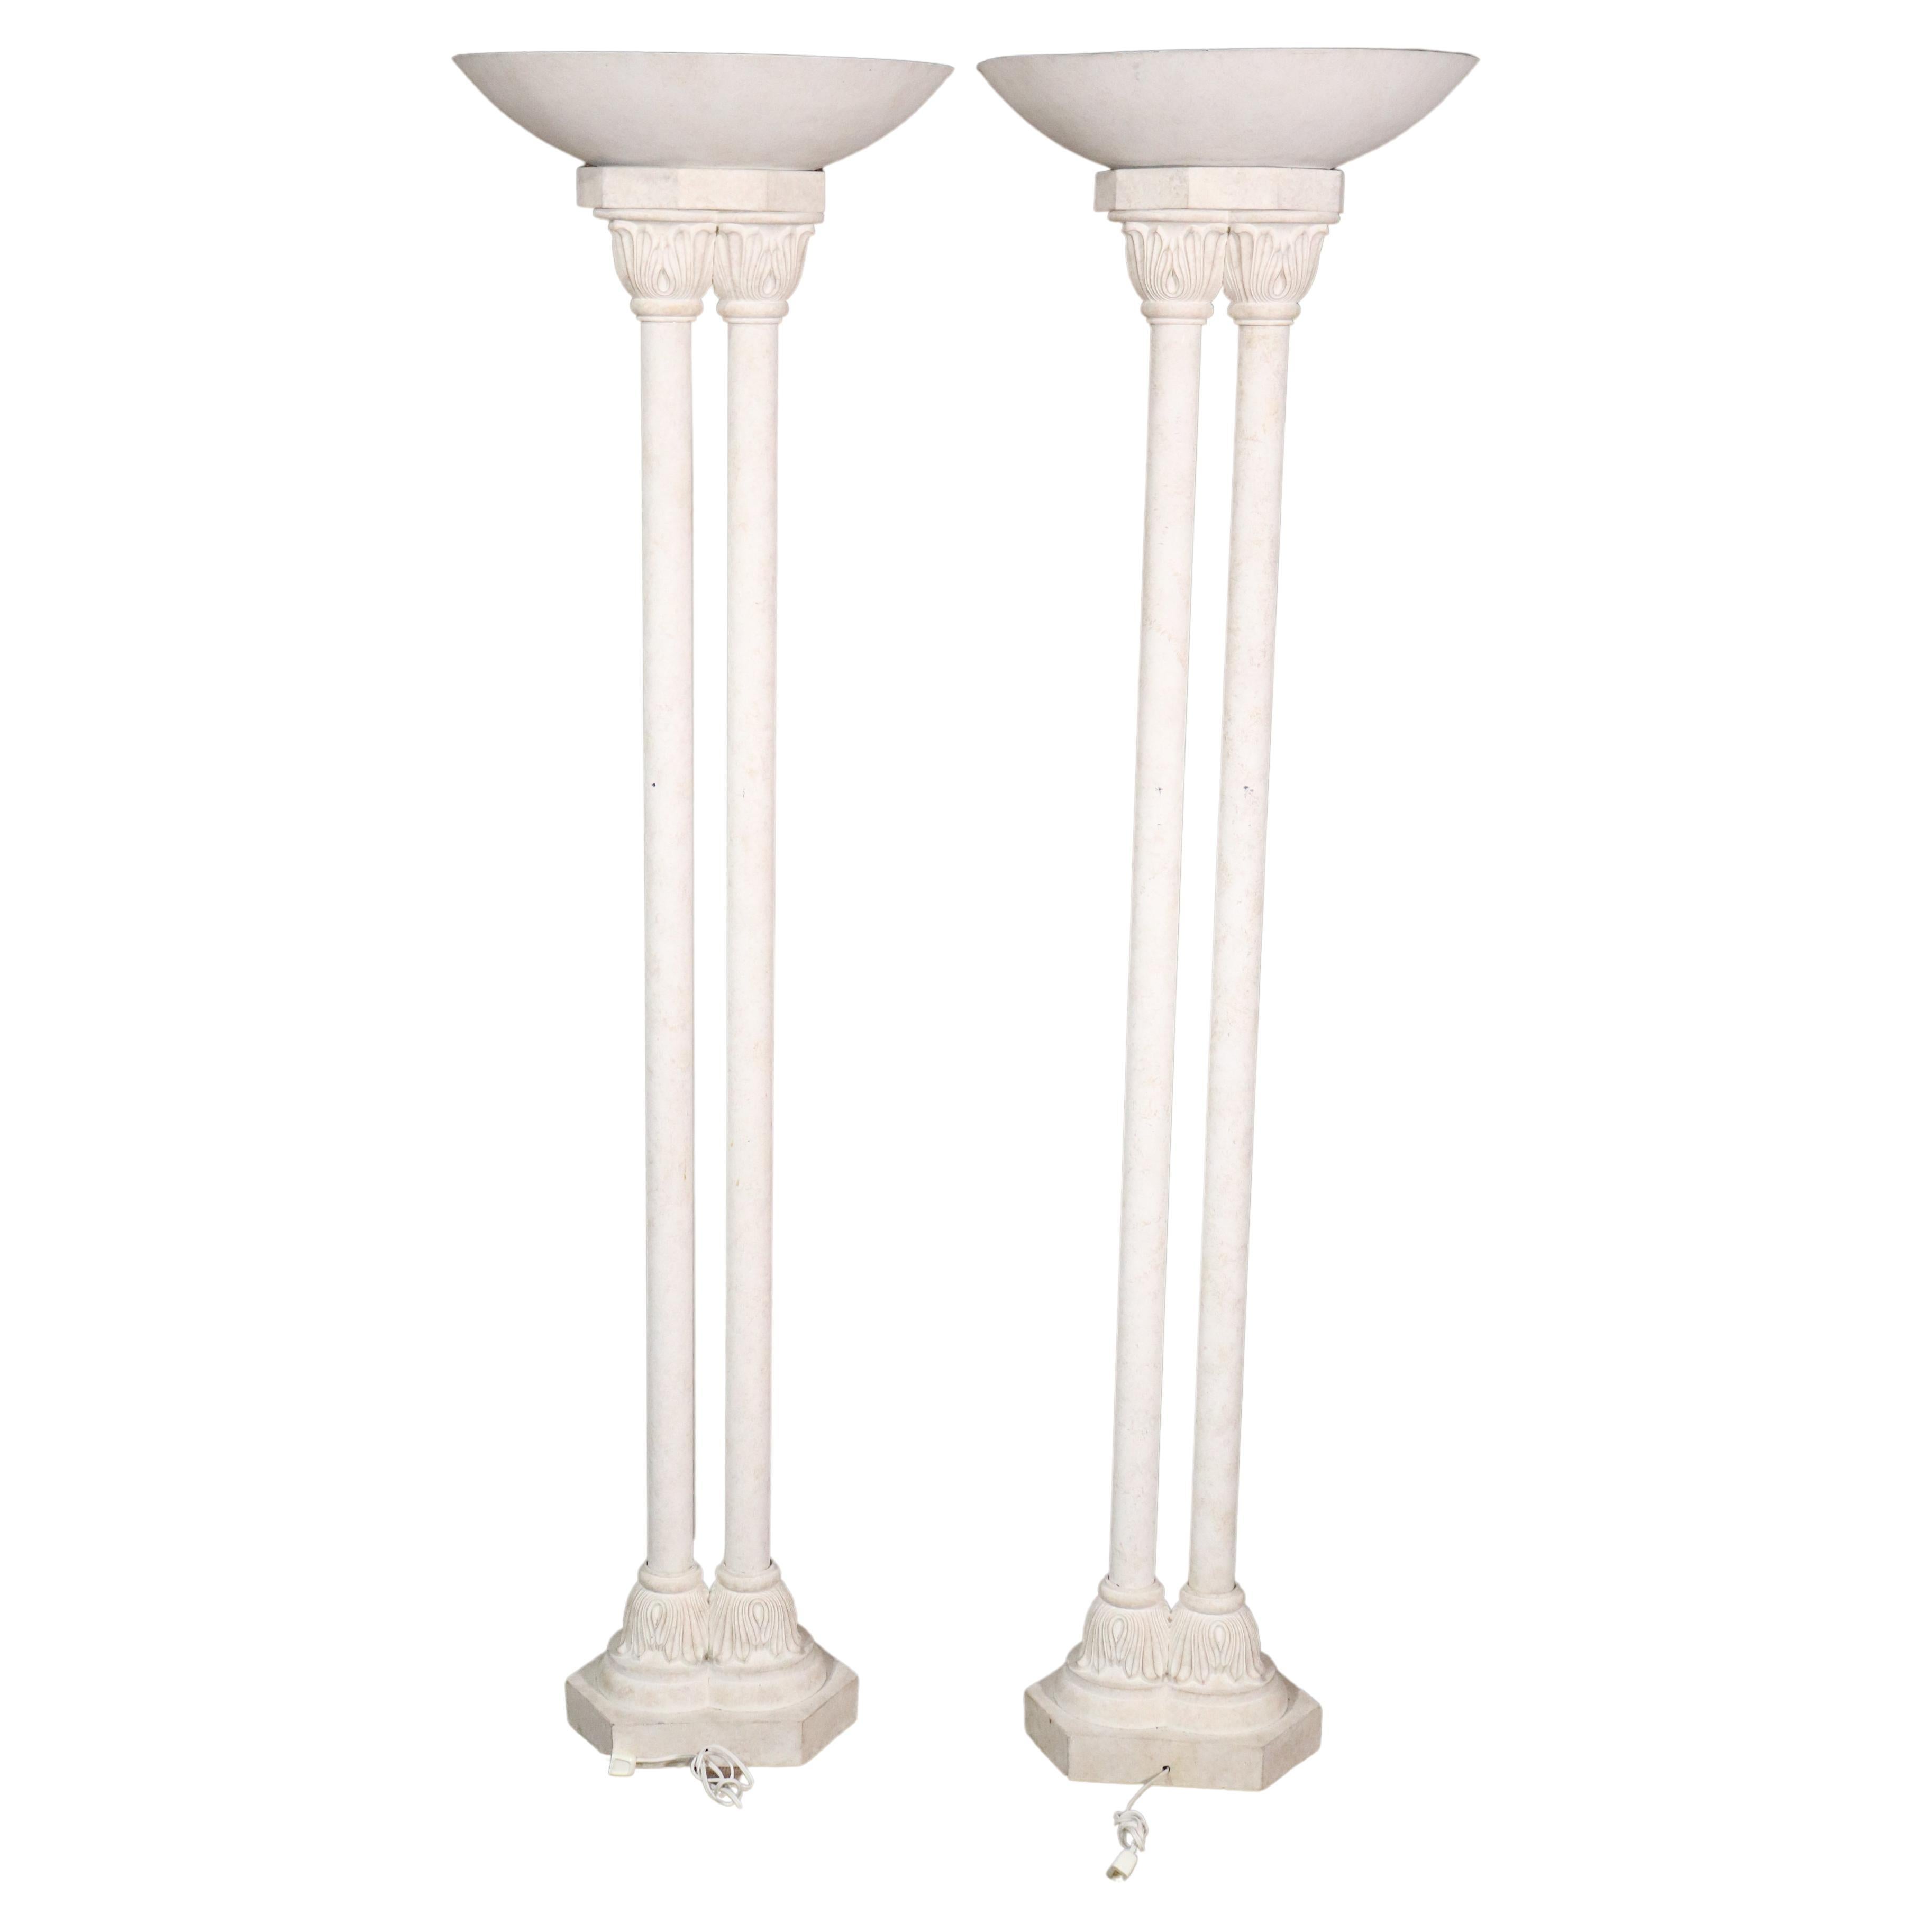 Pair of Stone Torchierre Lamps